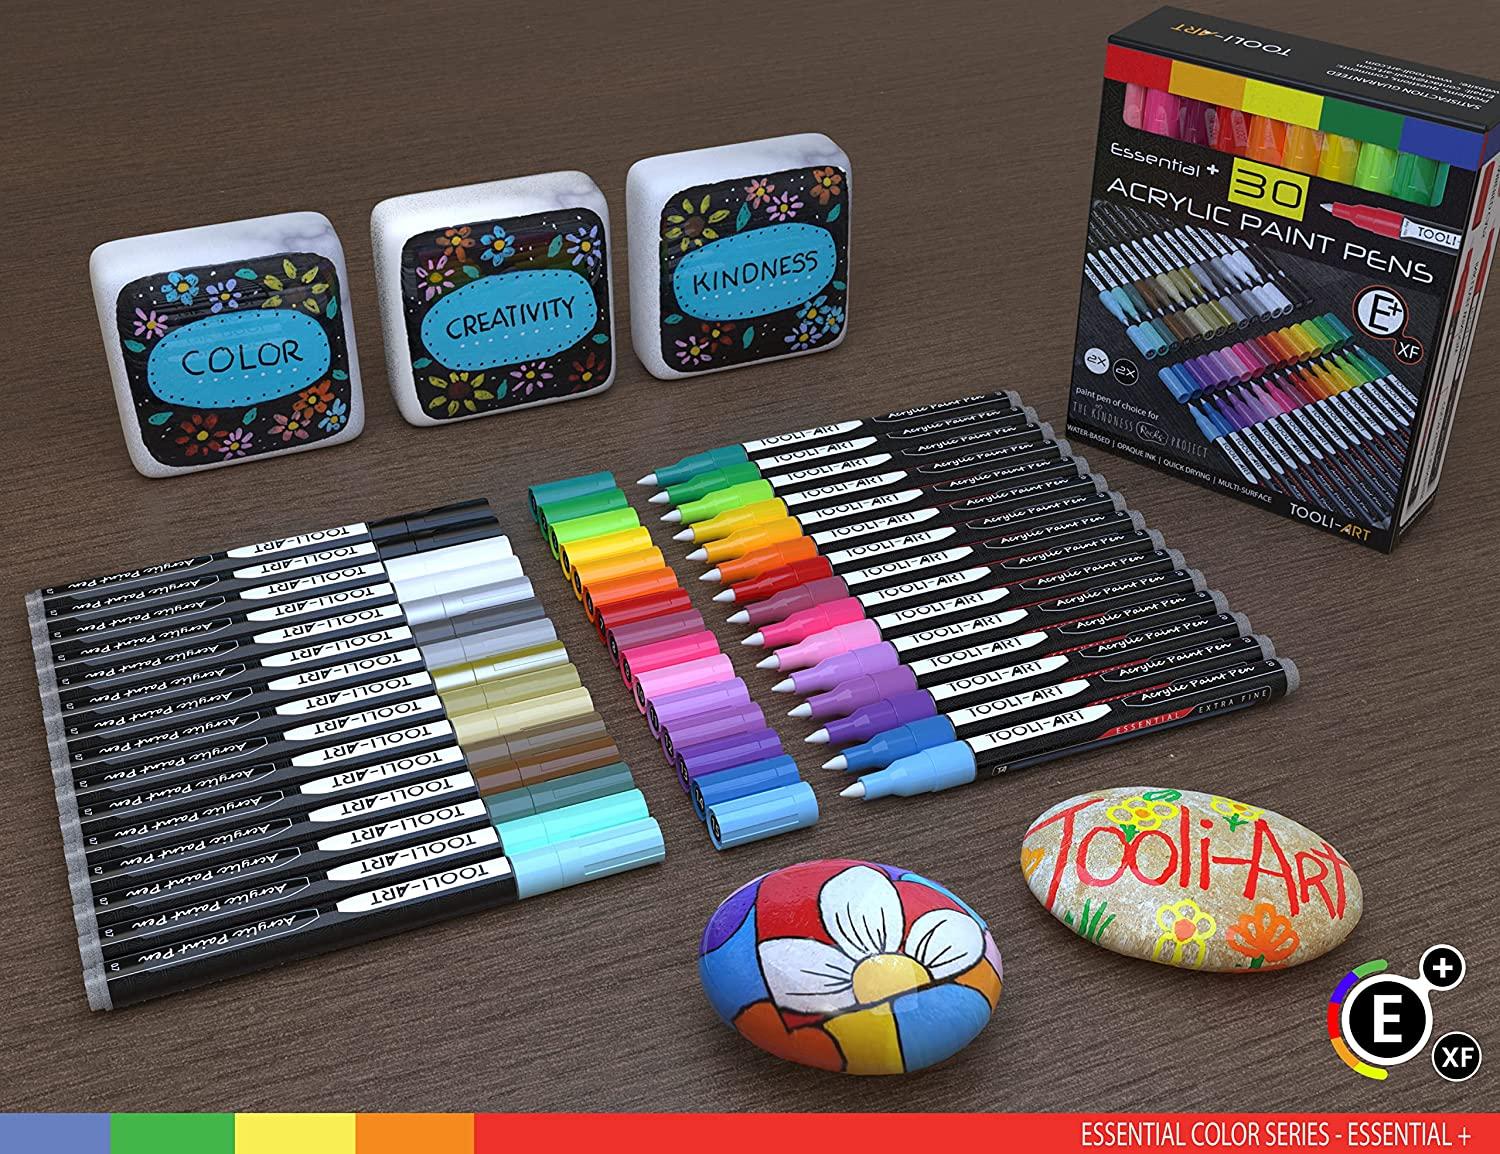 TOOLI-ART 22 Acrylic Paint Markers Paint Pens Pro Color Series Set 3mm Medium Tip for Rock Painting, Glass, Mugs, Wood, Metal, Glass Paint, Canvas